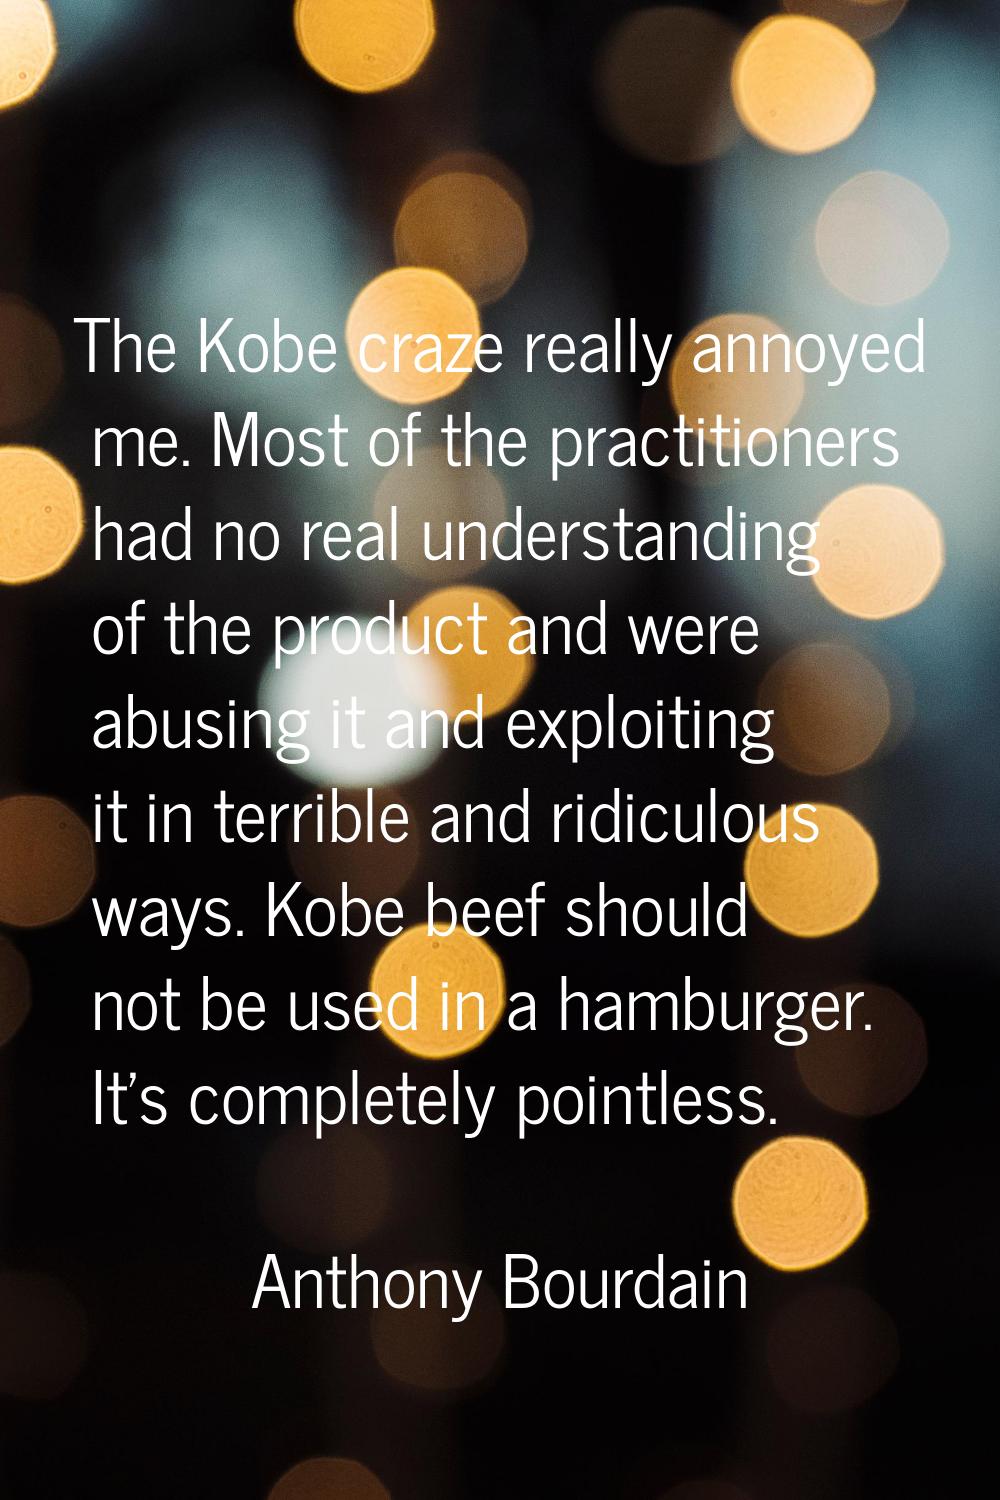 The Kobe craze really annoyed me. Most of the practitioners had no real understanding of the produc